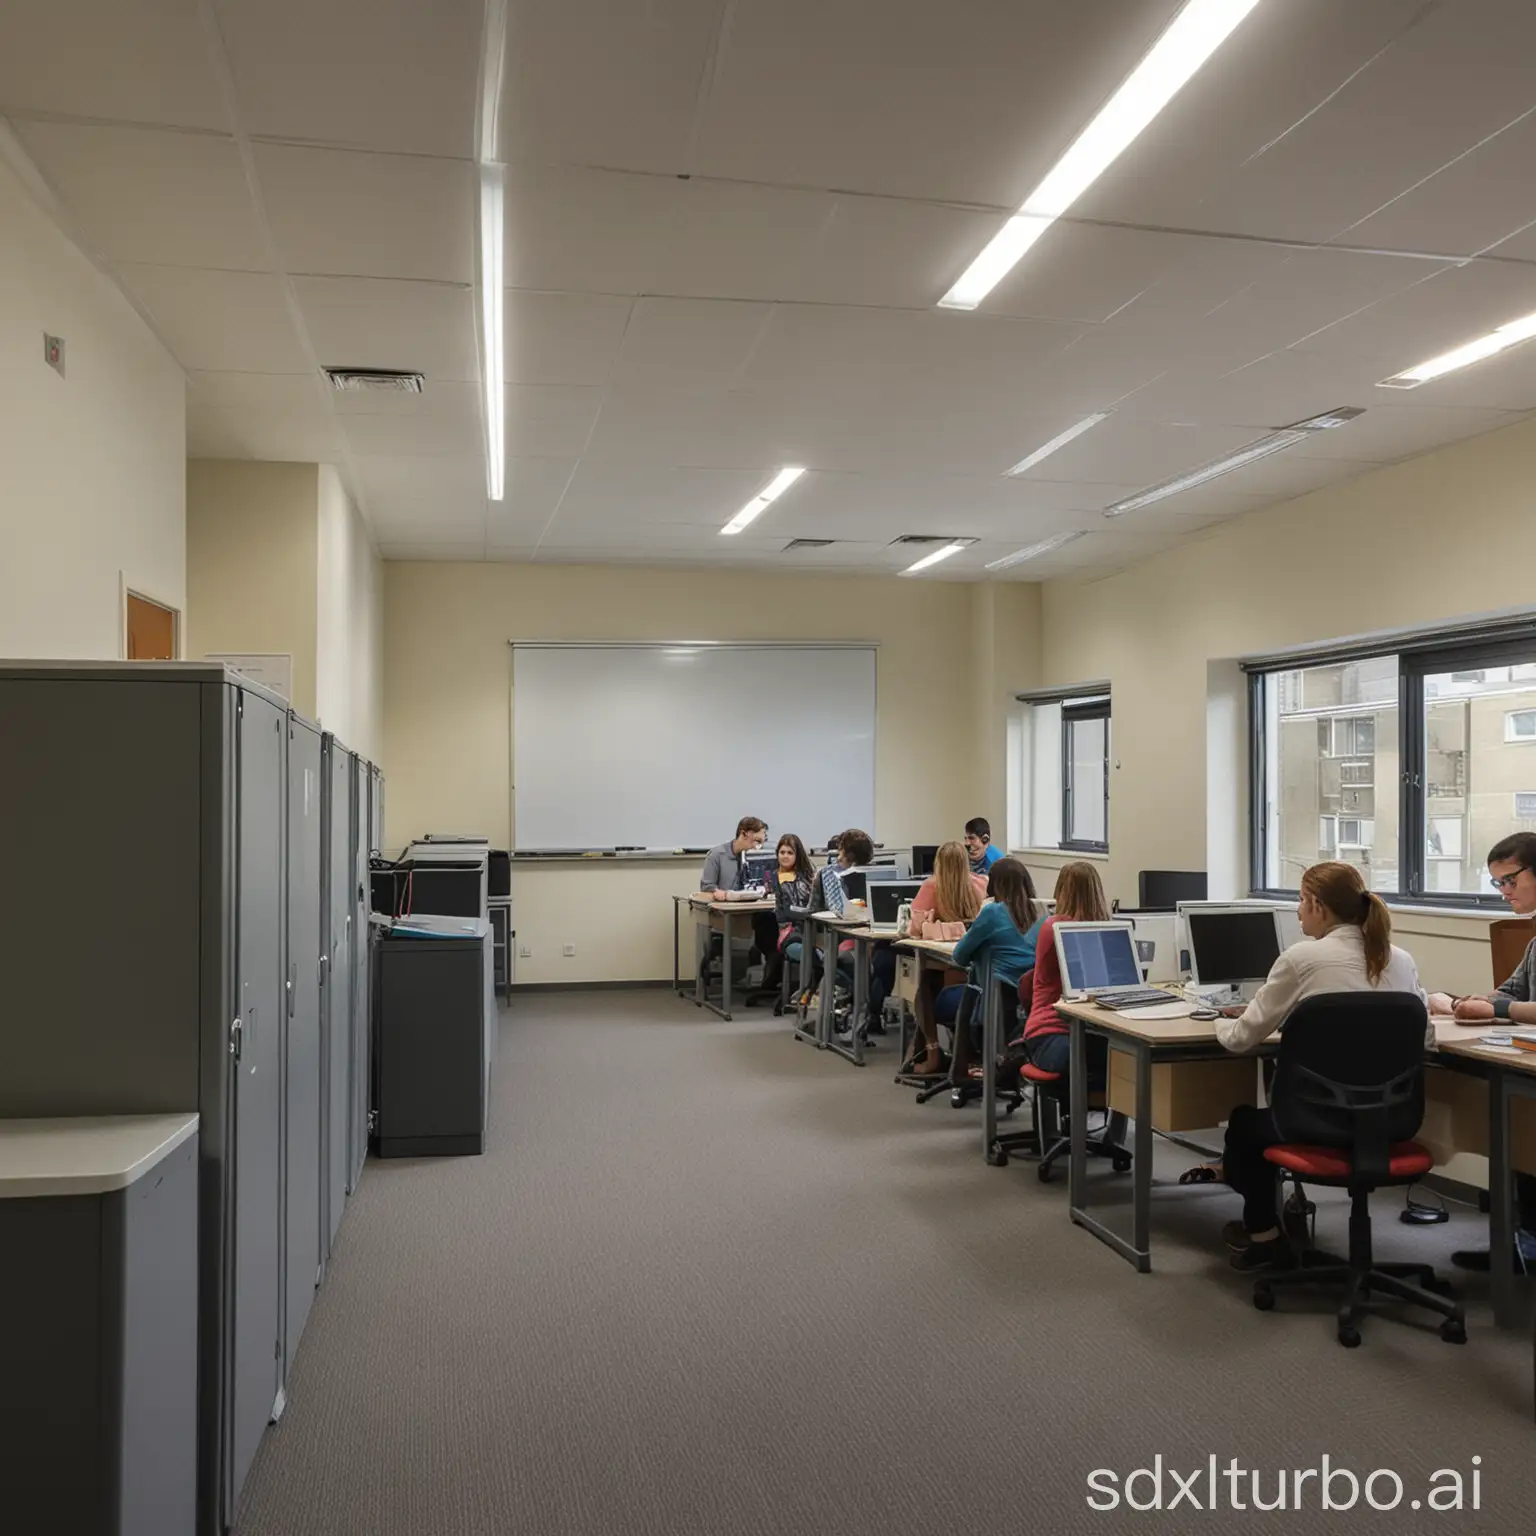 Students are having classes in the computer room